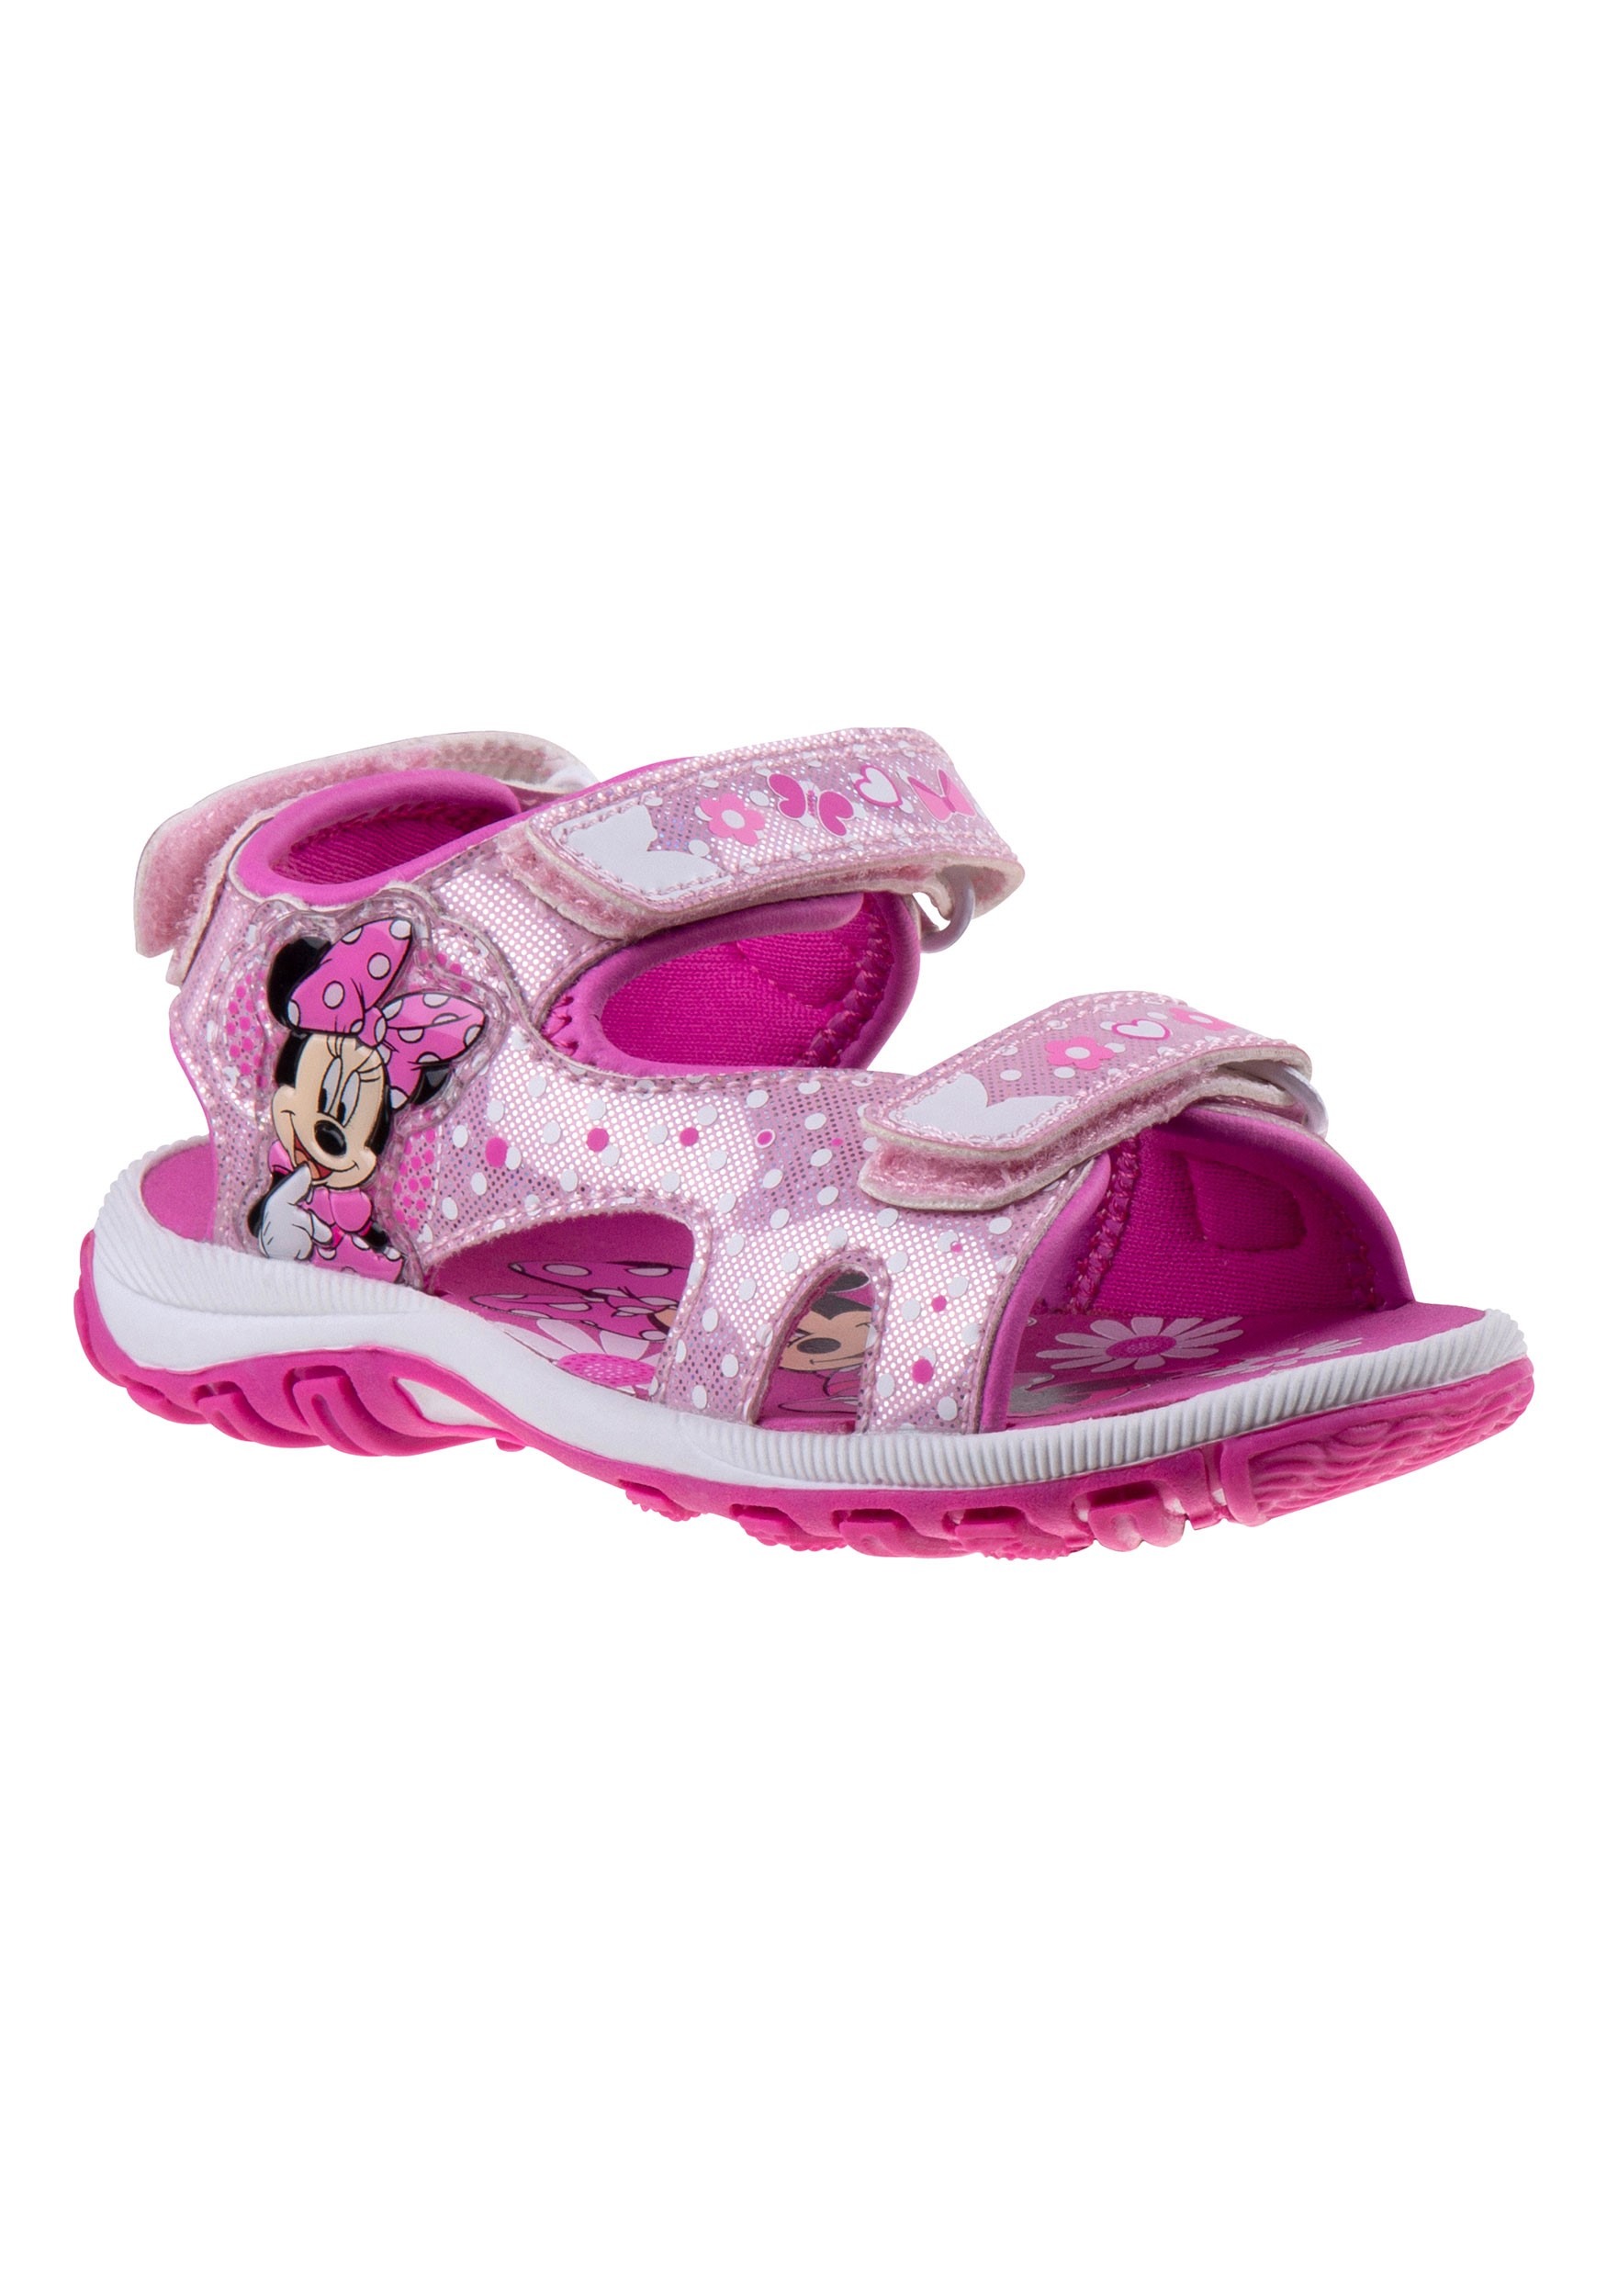 pink minnie mouse shoes for toddlers